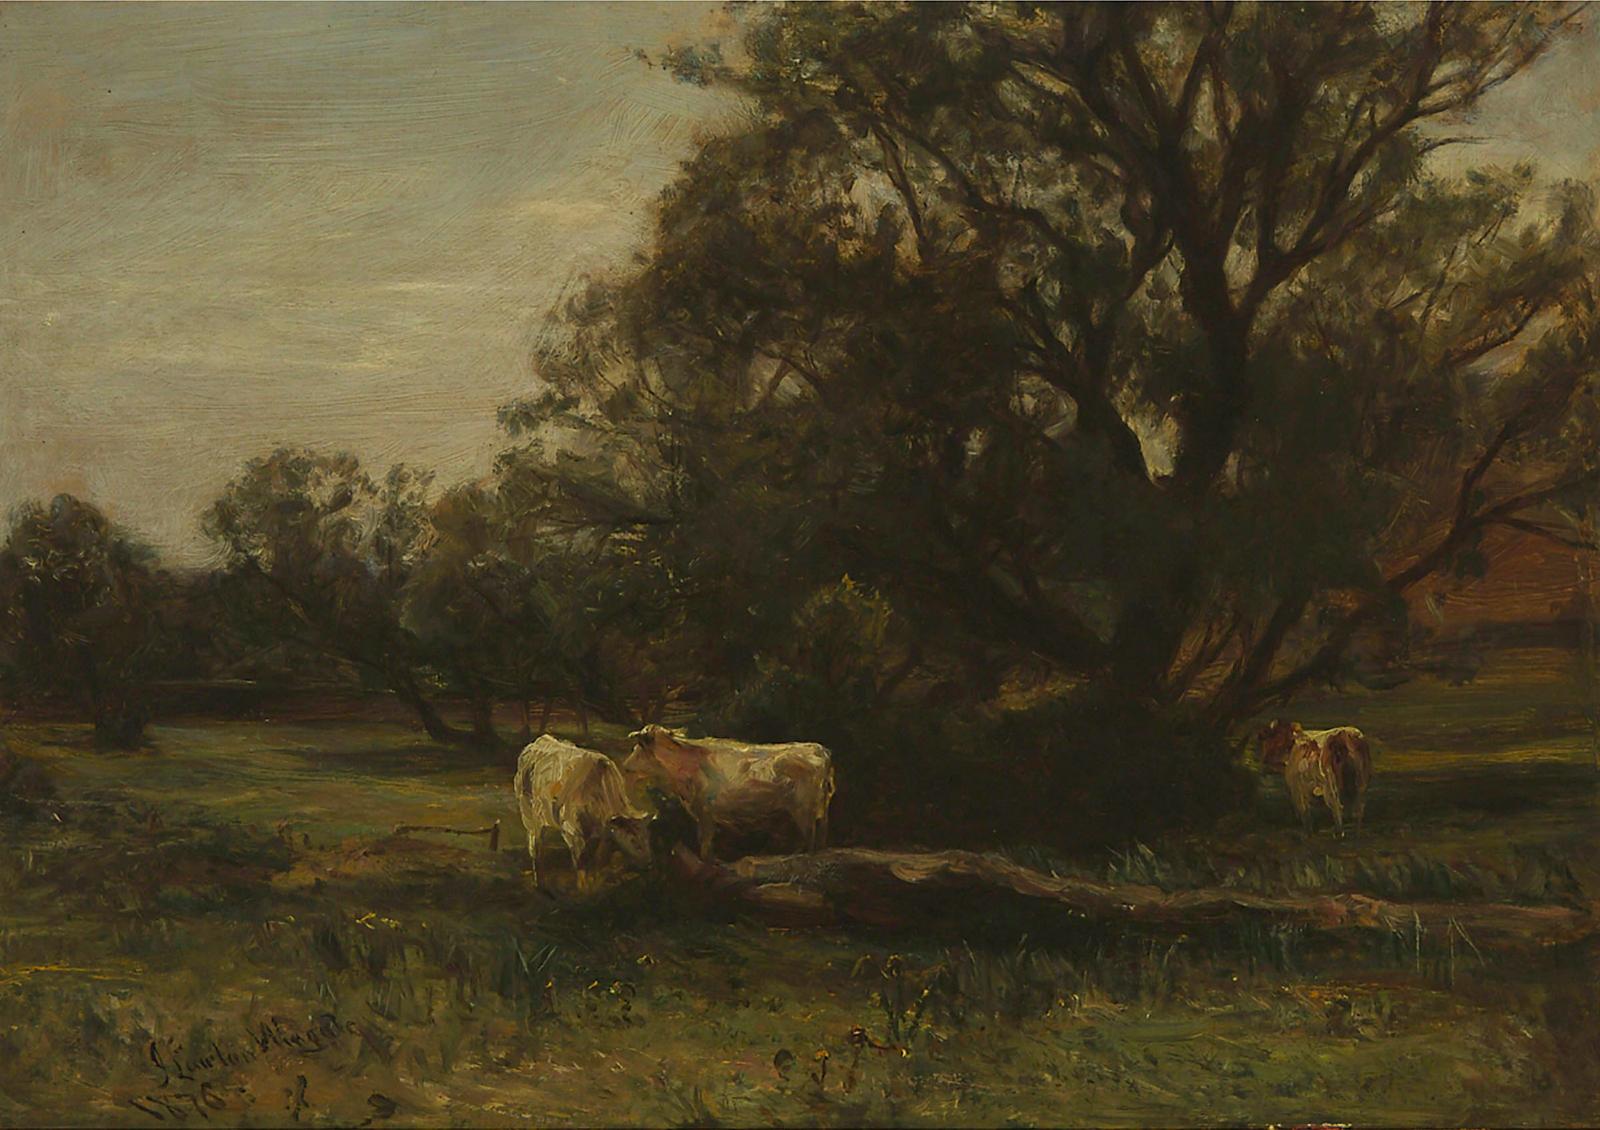 Sir James Lawton Wingate (1846-1942) - Cows Grazing In A Shady Pasture, 1876